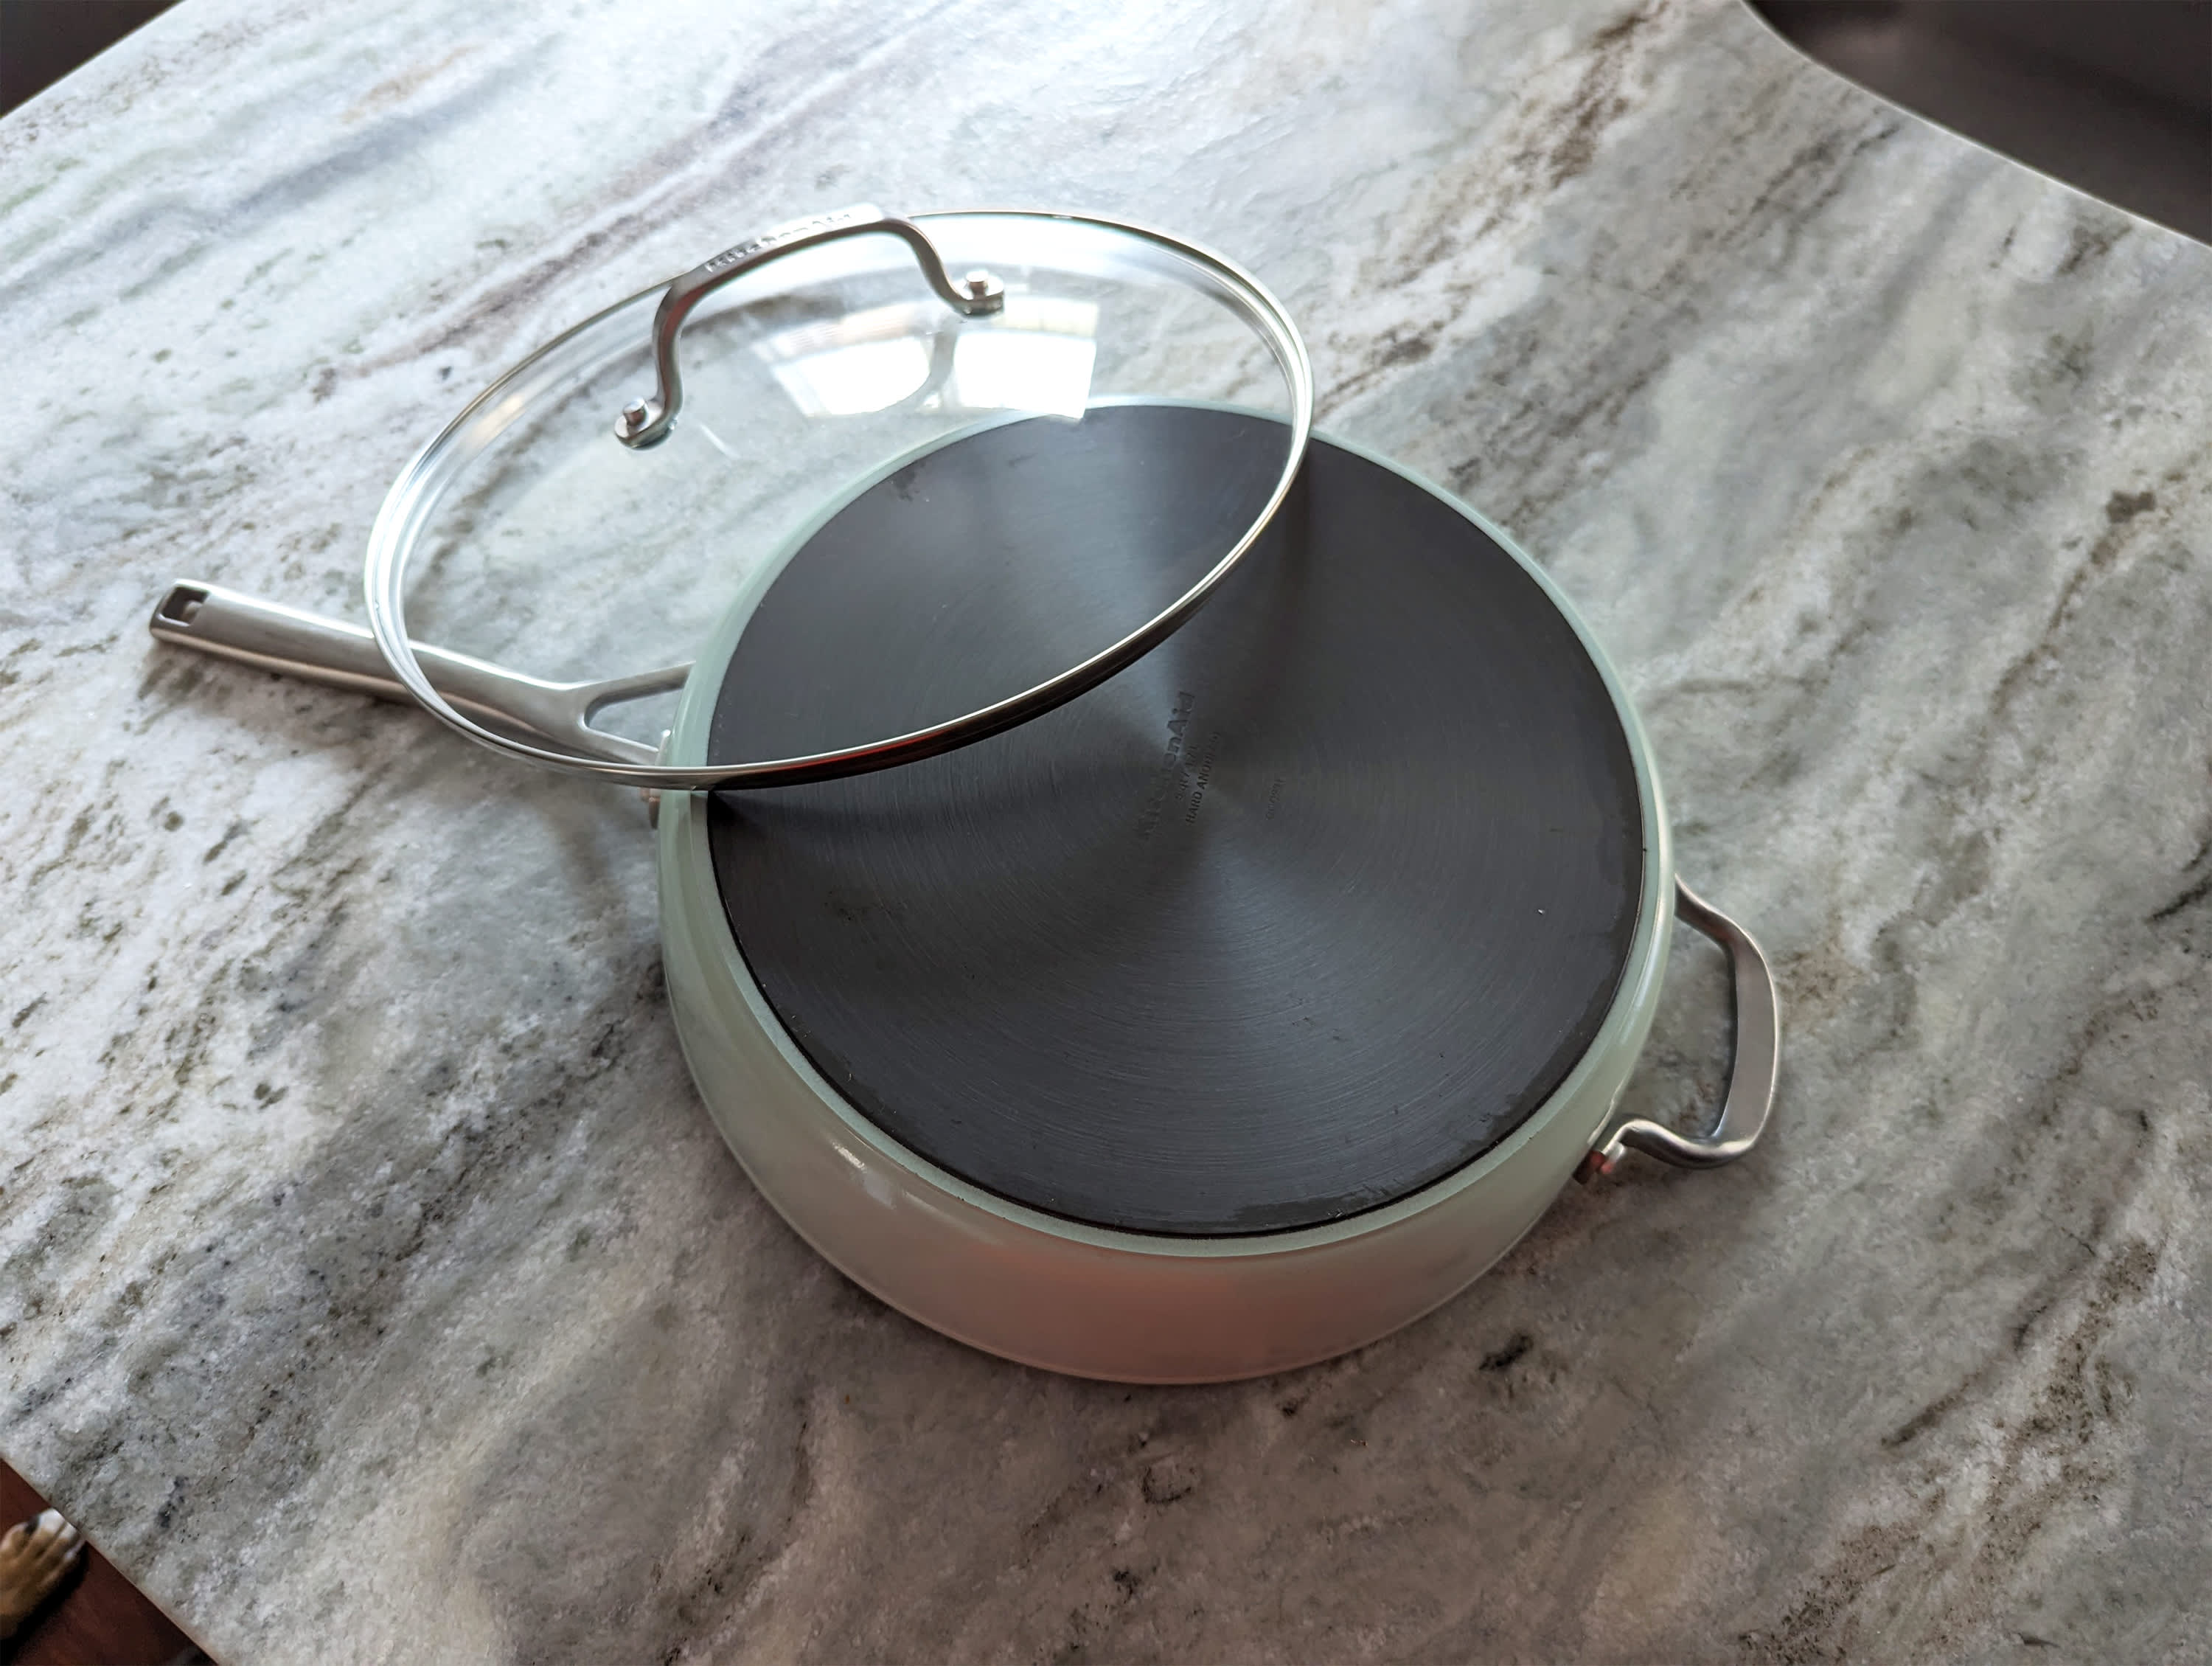 KitchenAid Cookware Review: Is this ceramic cookware set worth